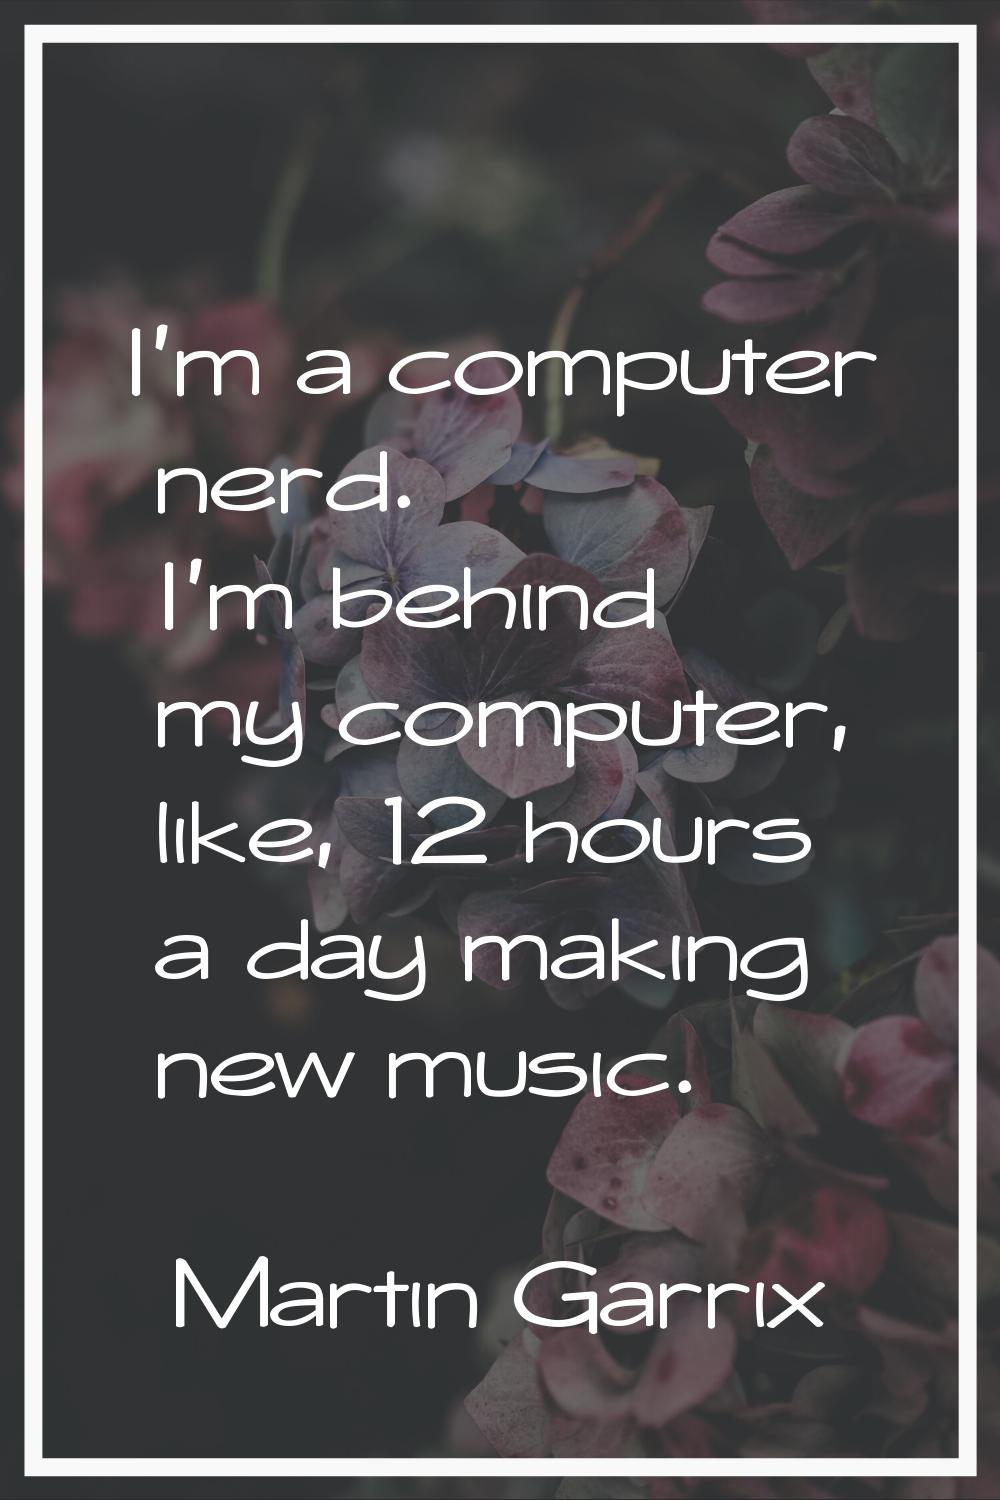 I'm a computer nerd. I'm behind my computer, like, 12 hours a day making new music.